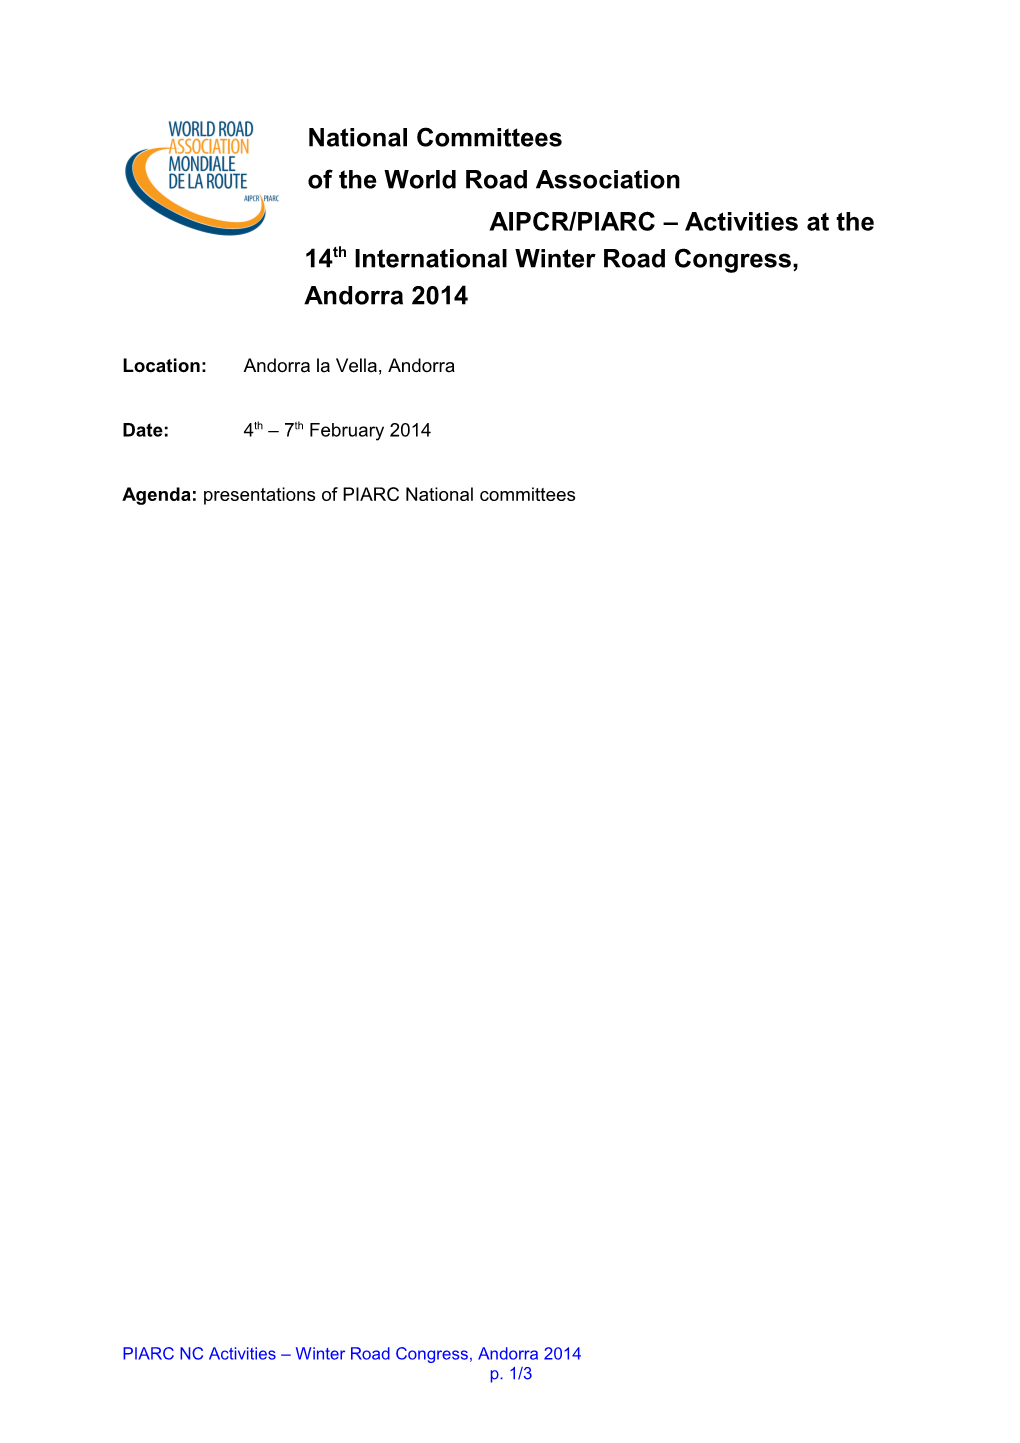 National Committees of the World Road Association AIPCR/PIARC